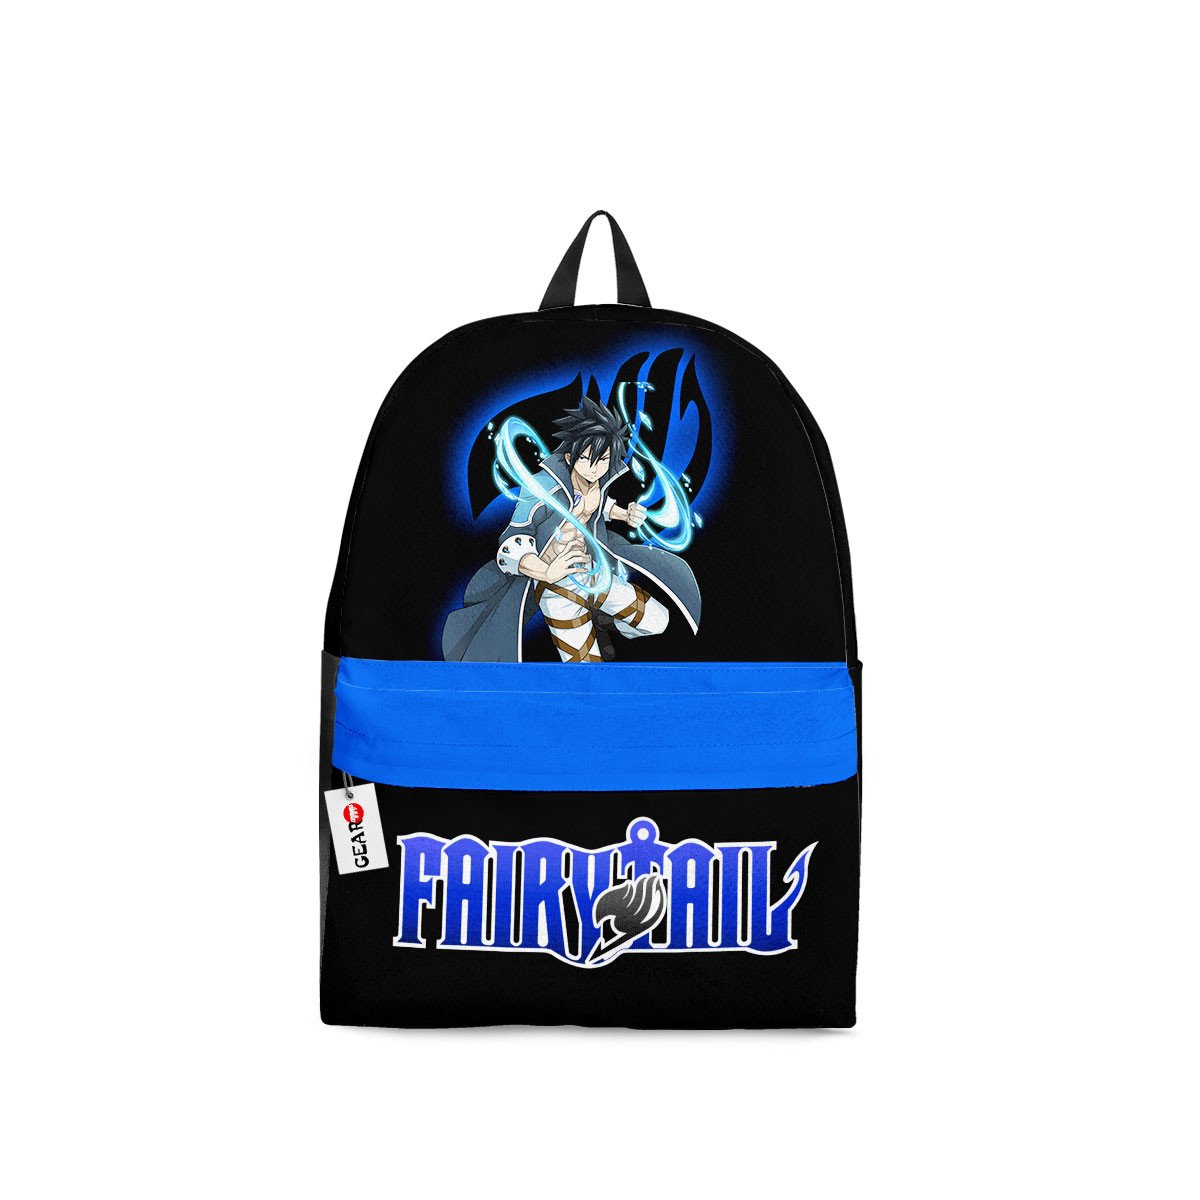 BEST Gray Fullbuster Fairy Tail Anime Printed 3D Leisure Backpack